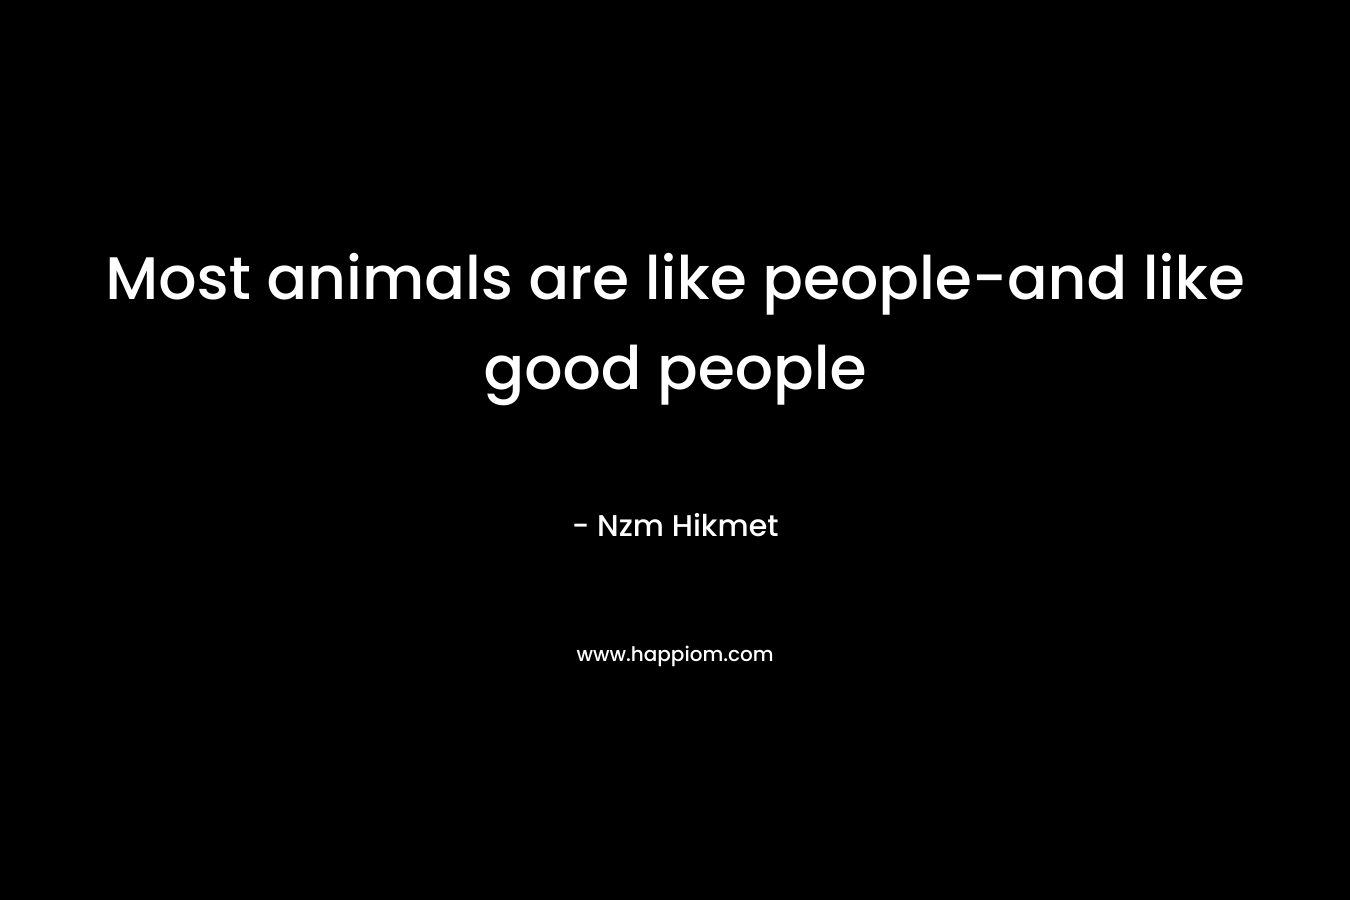 Most animals are like people-and like good people